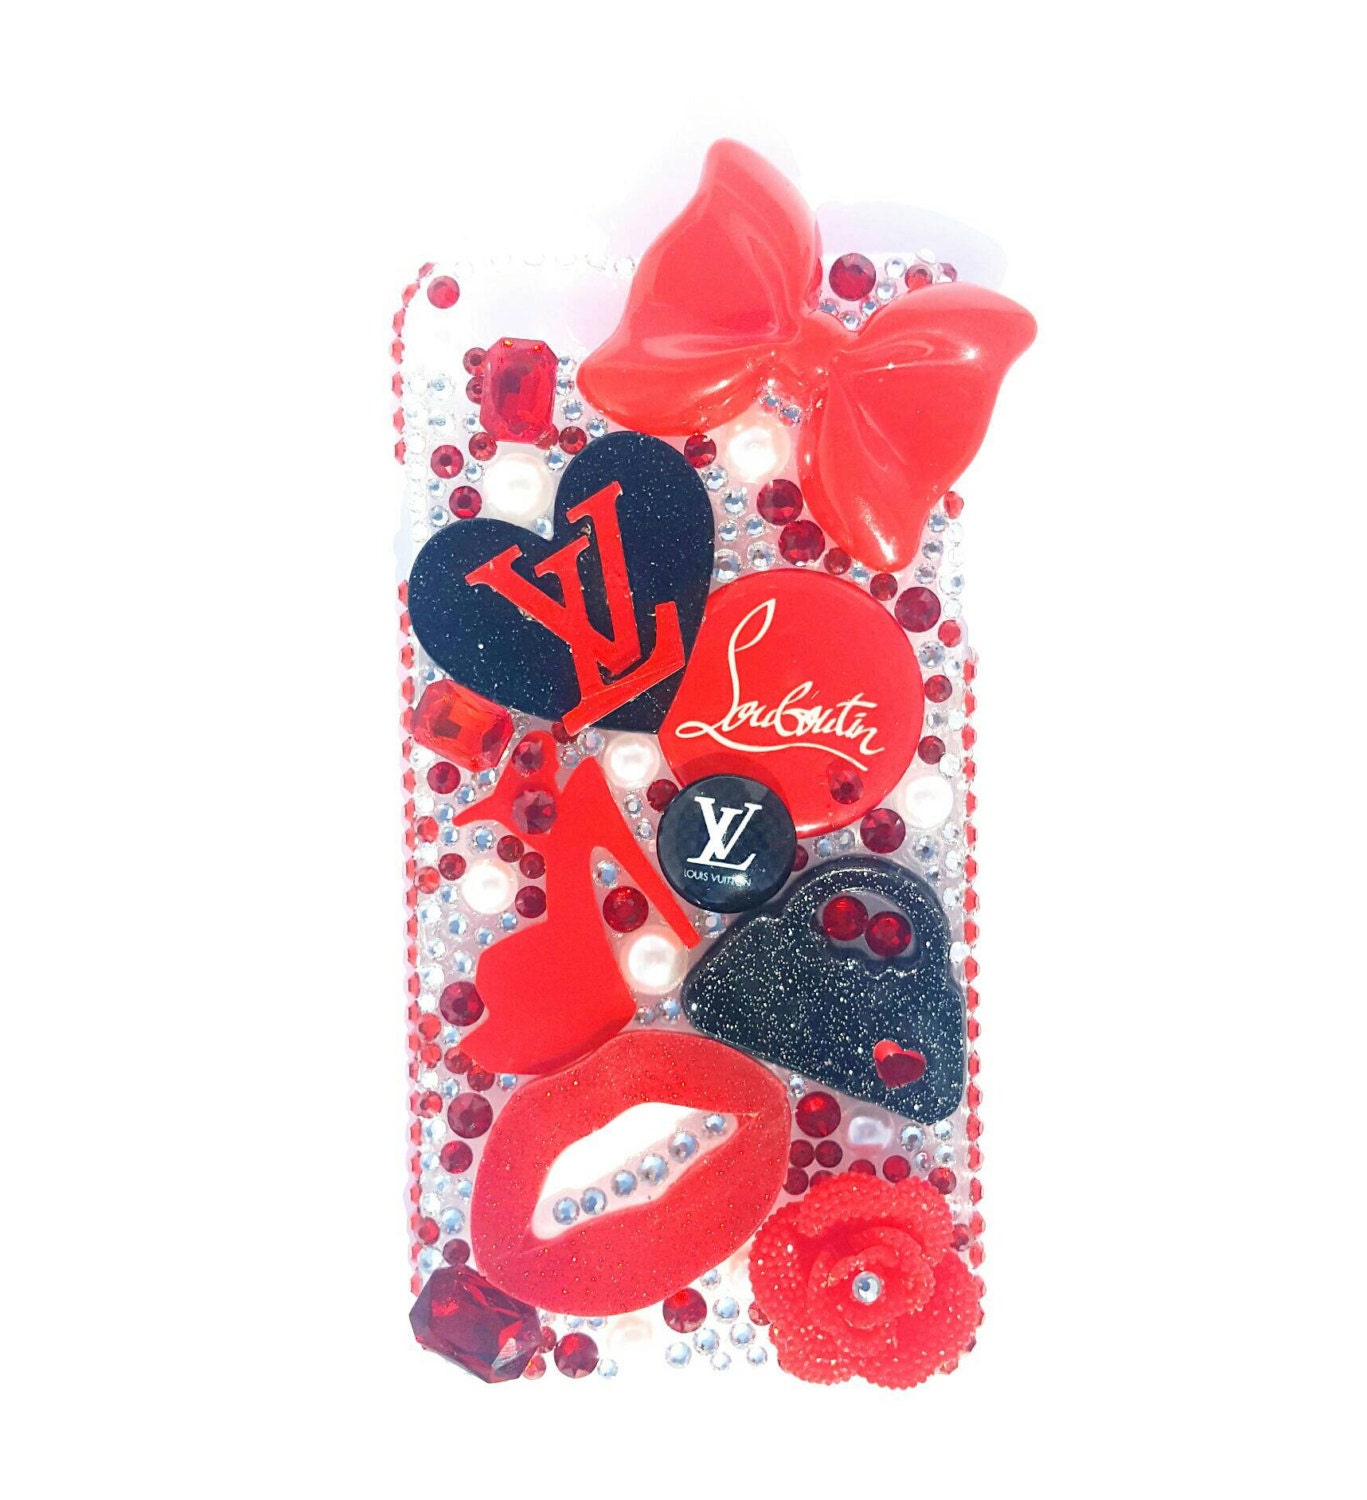 Red Louis Vuitton inspired BLING case Iphone by CrystalizedCases